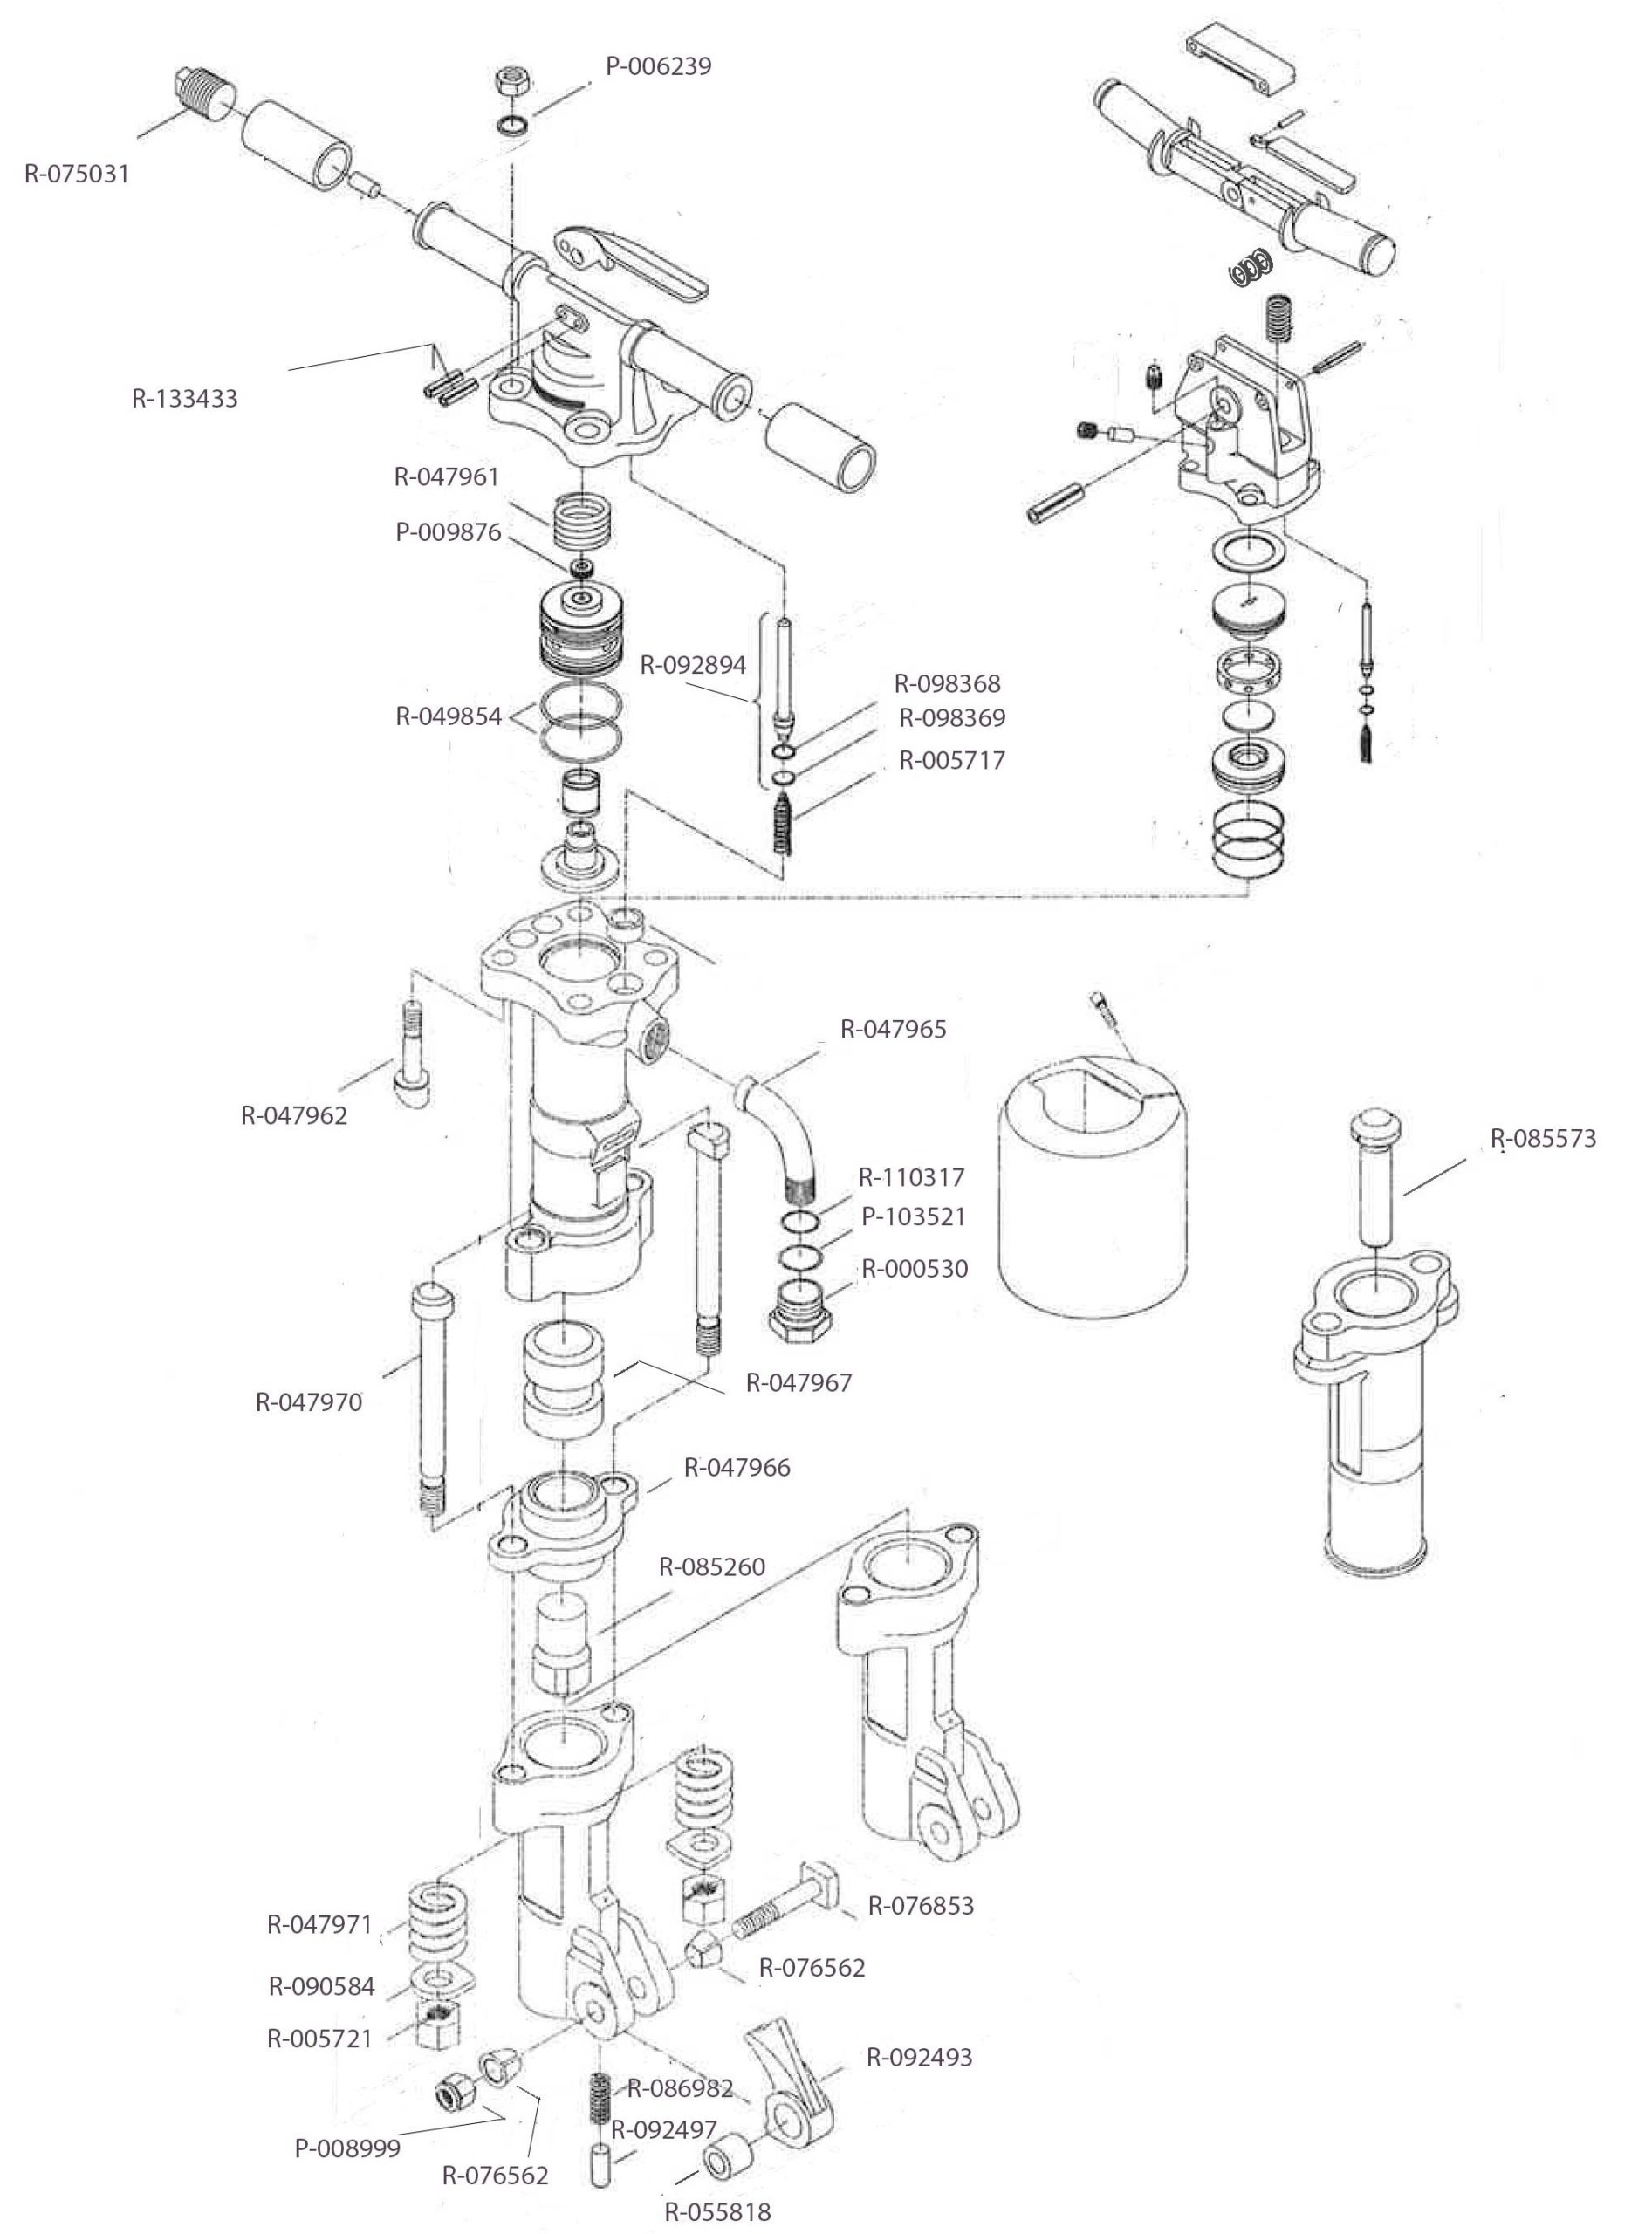 CP 1230S Schematic & Replacement Parts for Chicago Pneumatic - Model 1230S - Paving Breaker